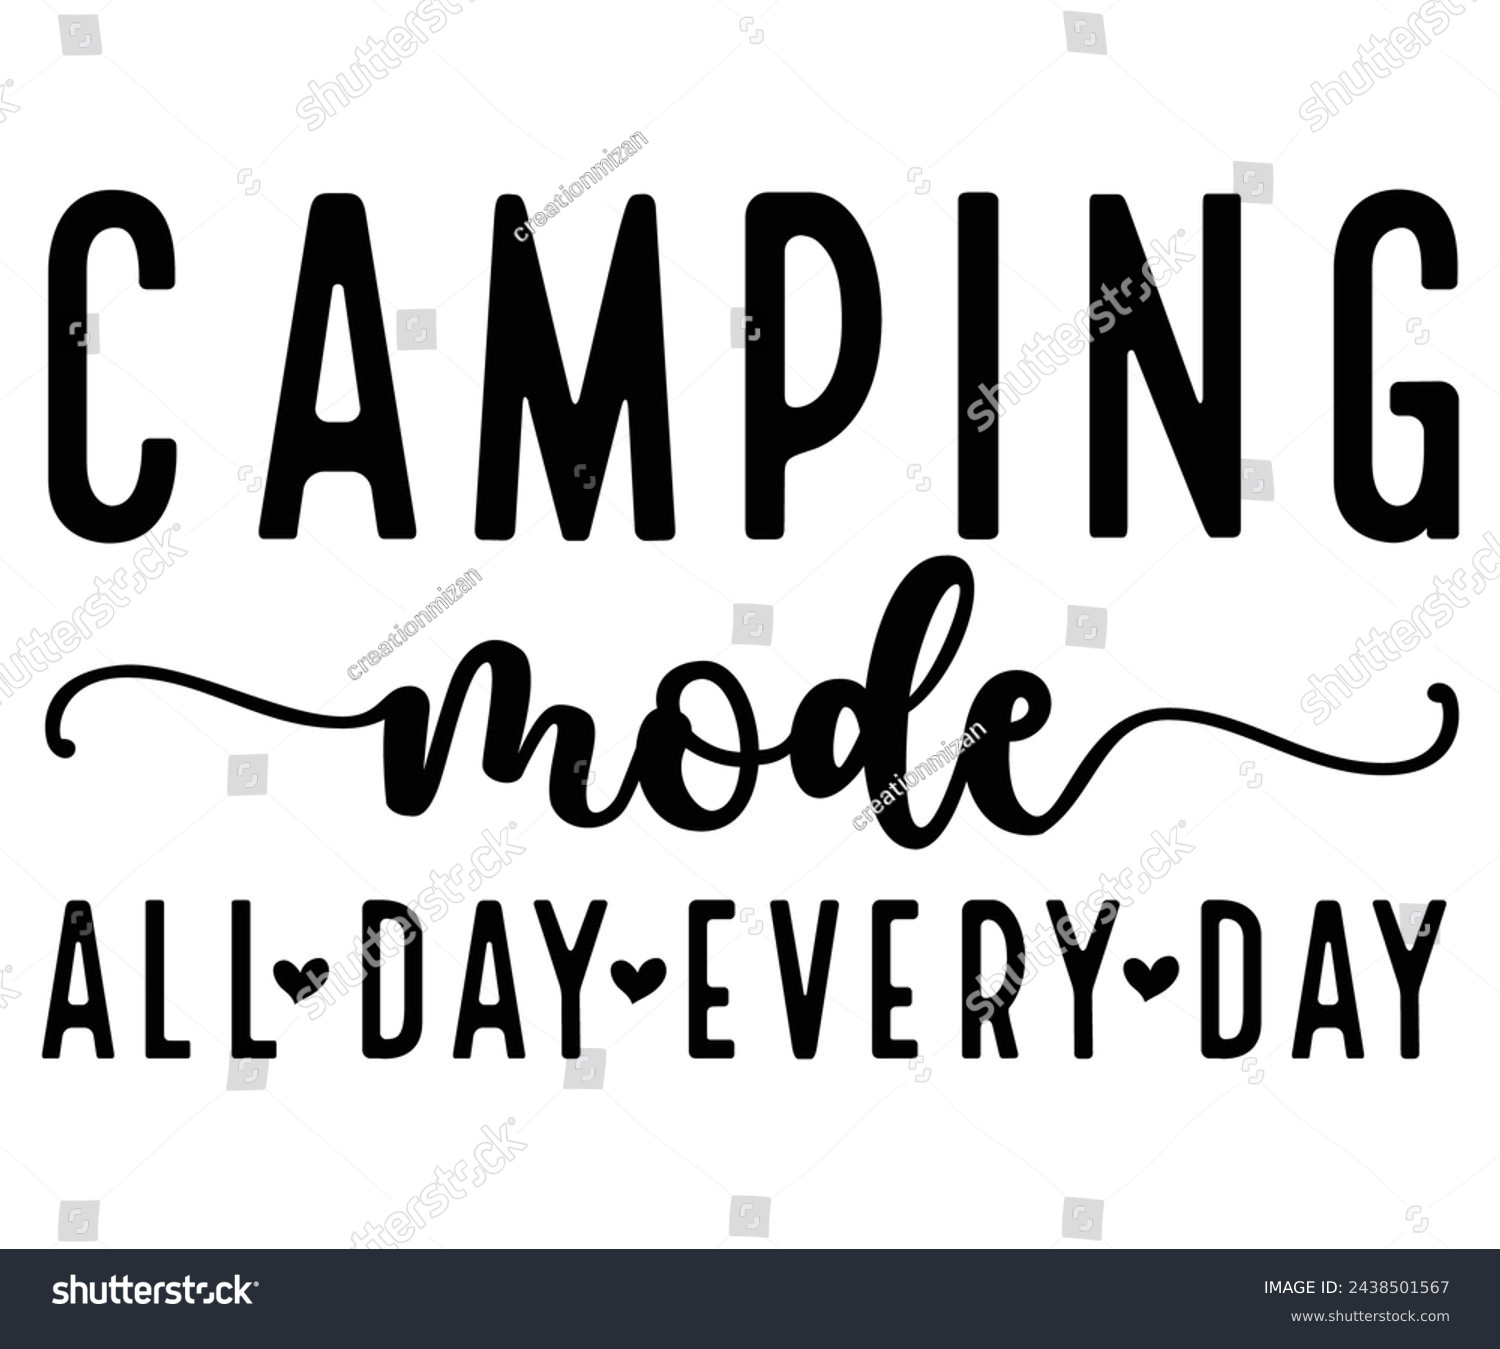 SVG of Camping Mode All Day Every Day Svg,Camping Svg,Hiking,Funny Camping,Adventure,Summer Camp,Happy Camper,Camp Life,Camp Saying,Camping Shirt svg